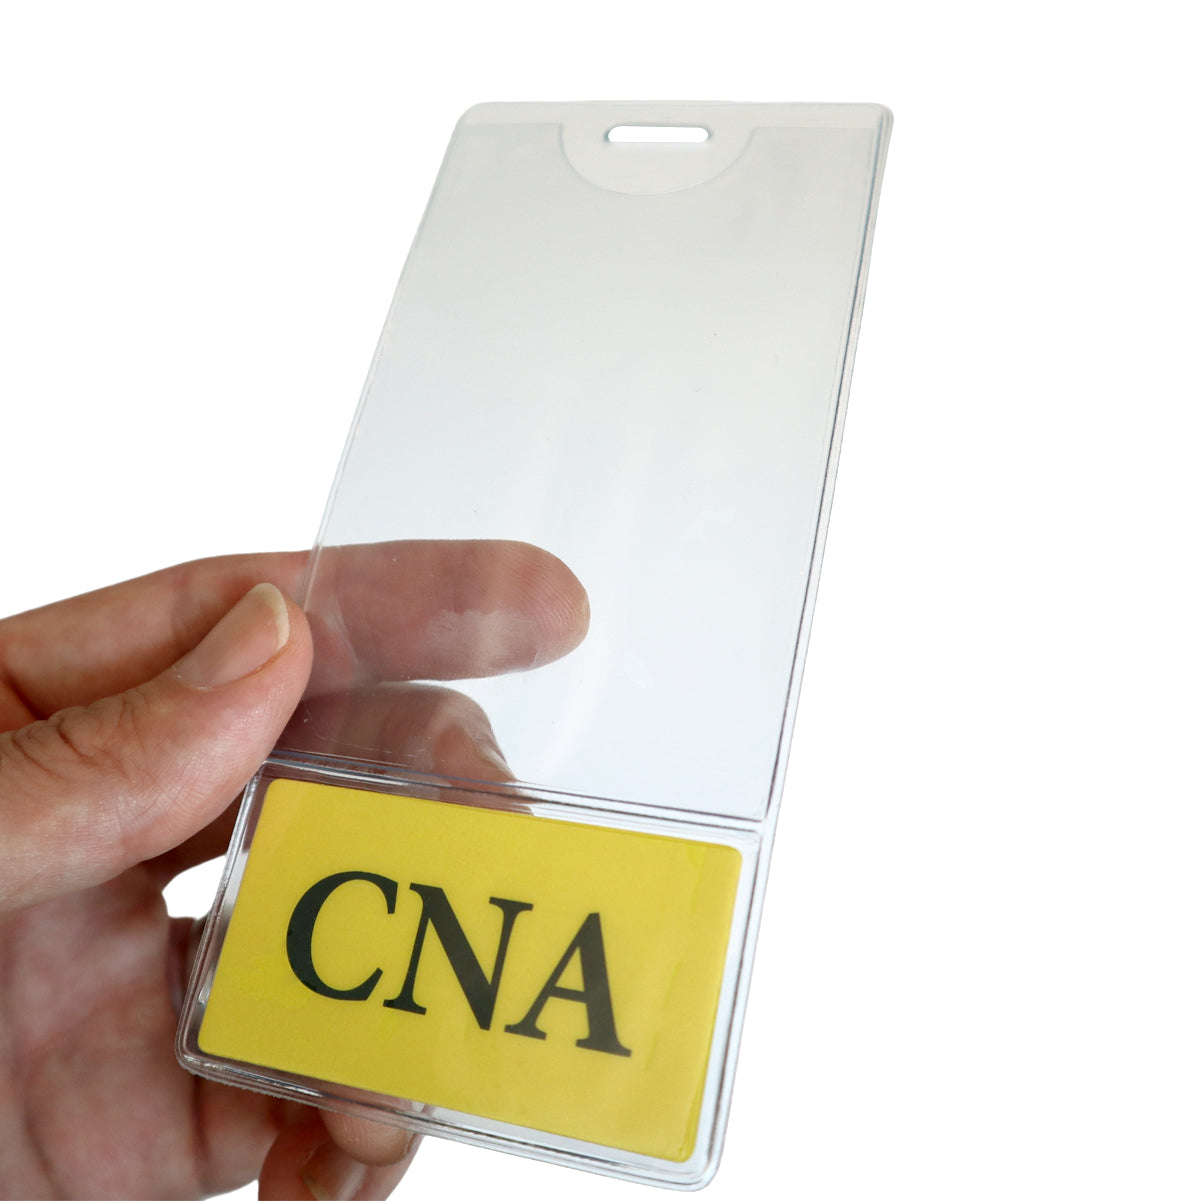 CNA BadgeBottoms 2 in 1 Badge Buddy and ID Badge Holder - Vinyl Sleeve for ID Card and Badge Bottom for Role Tag - Double Sided Print